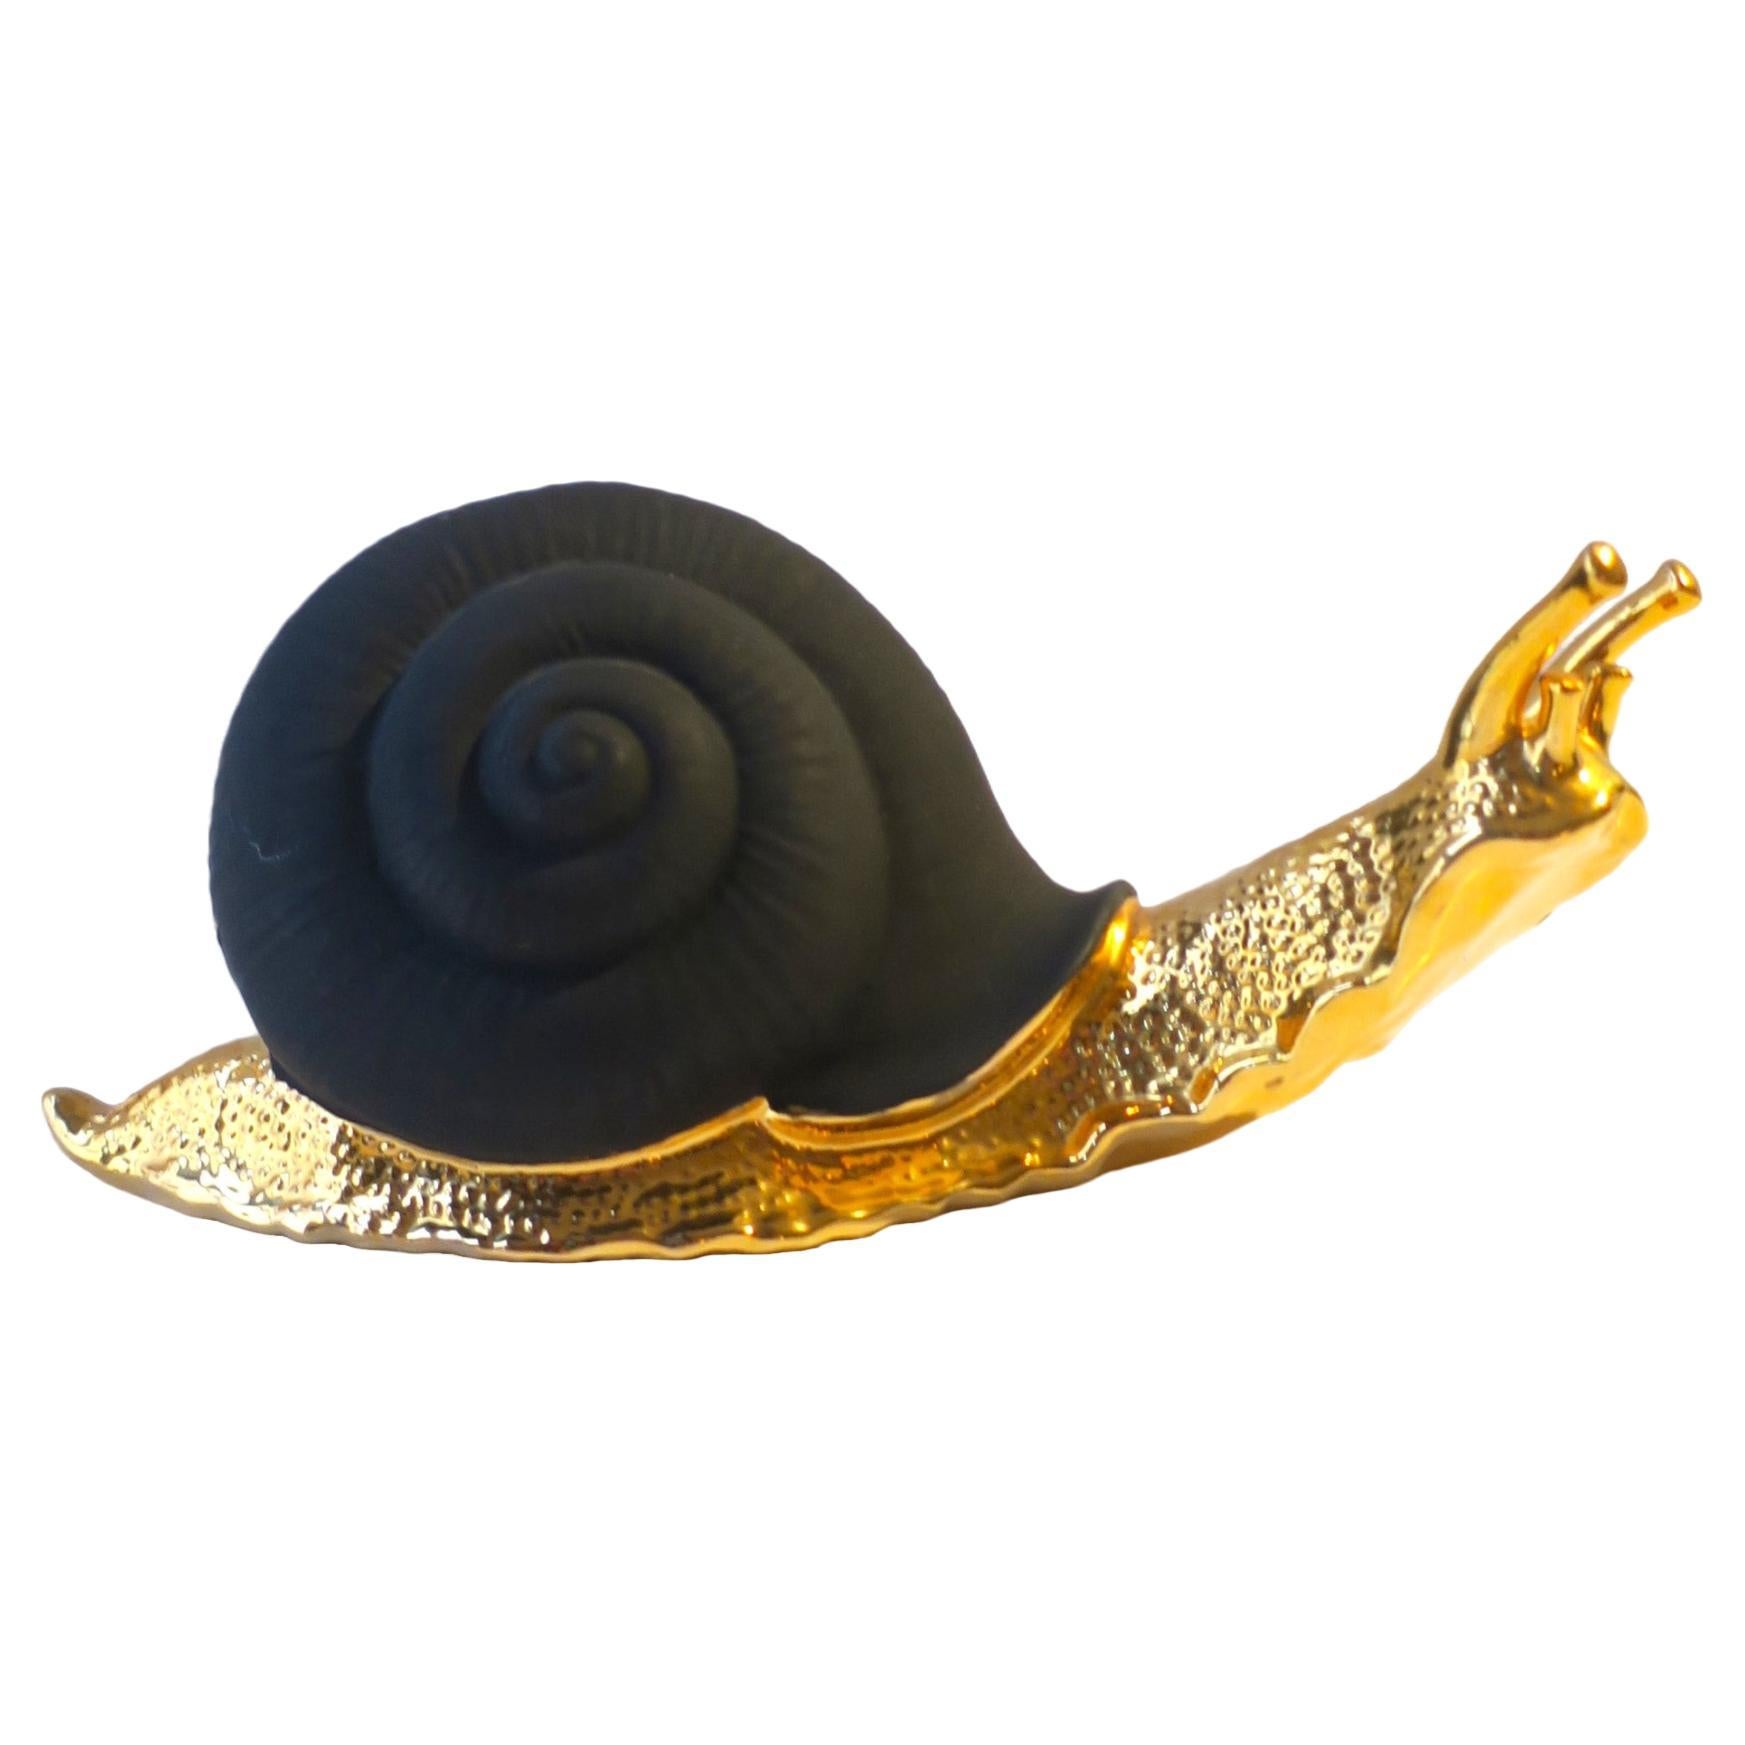 Italian Snail Sculpture Black and Gold  For Sale